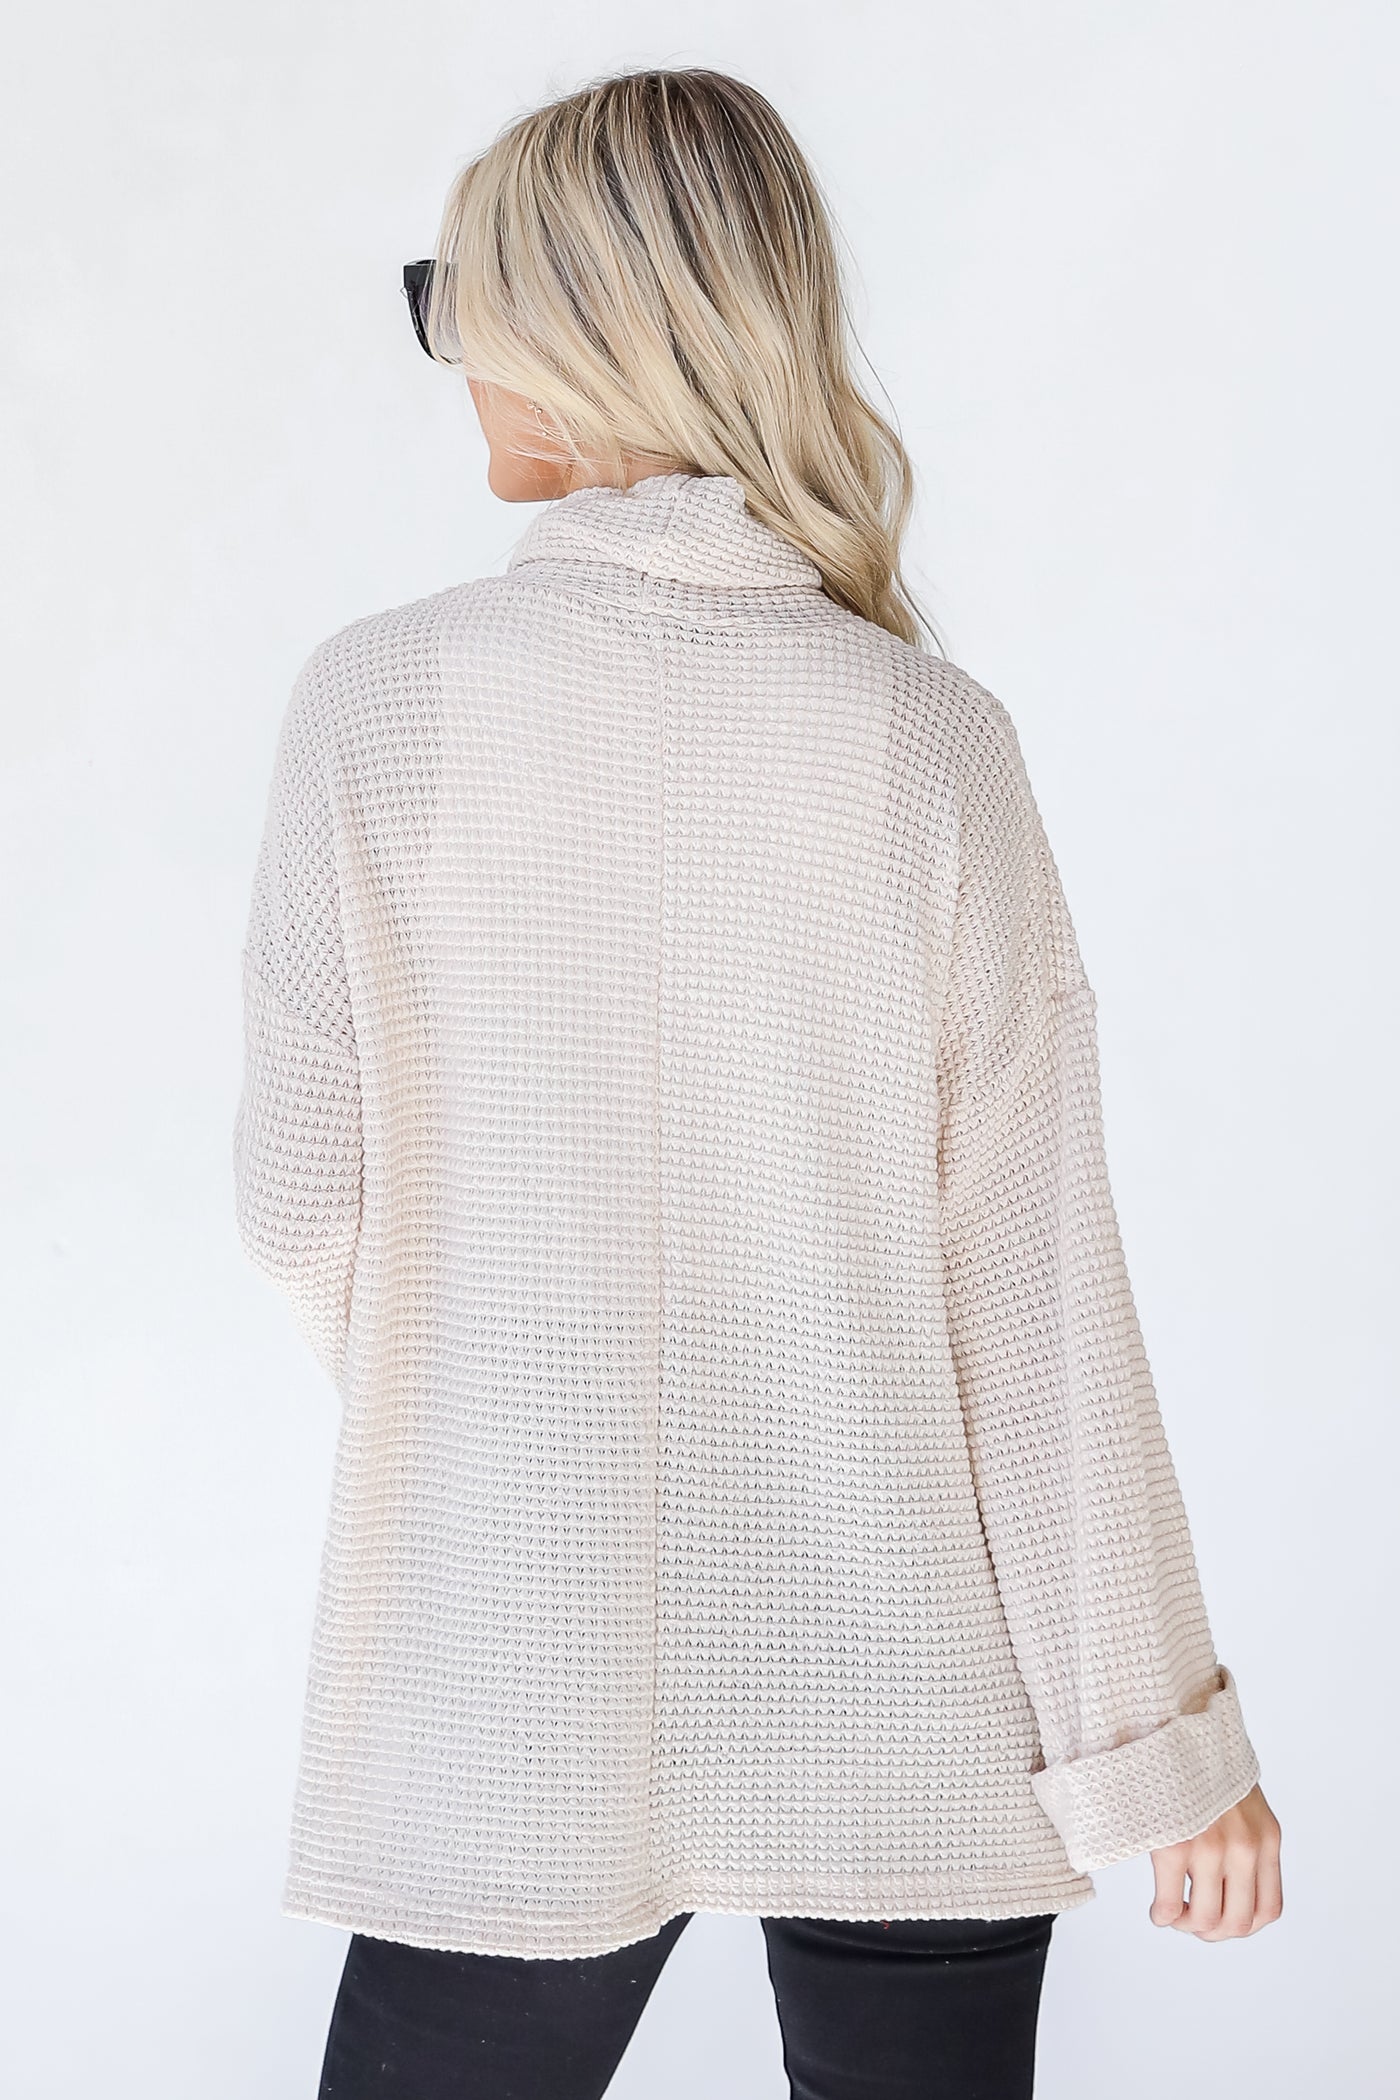 Waffle Knit Top in taupe back view